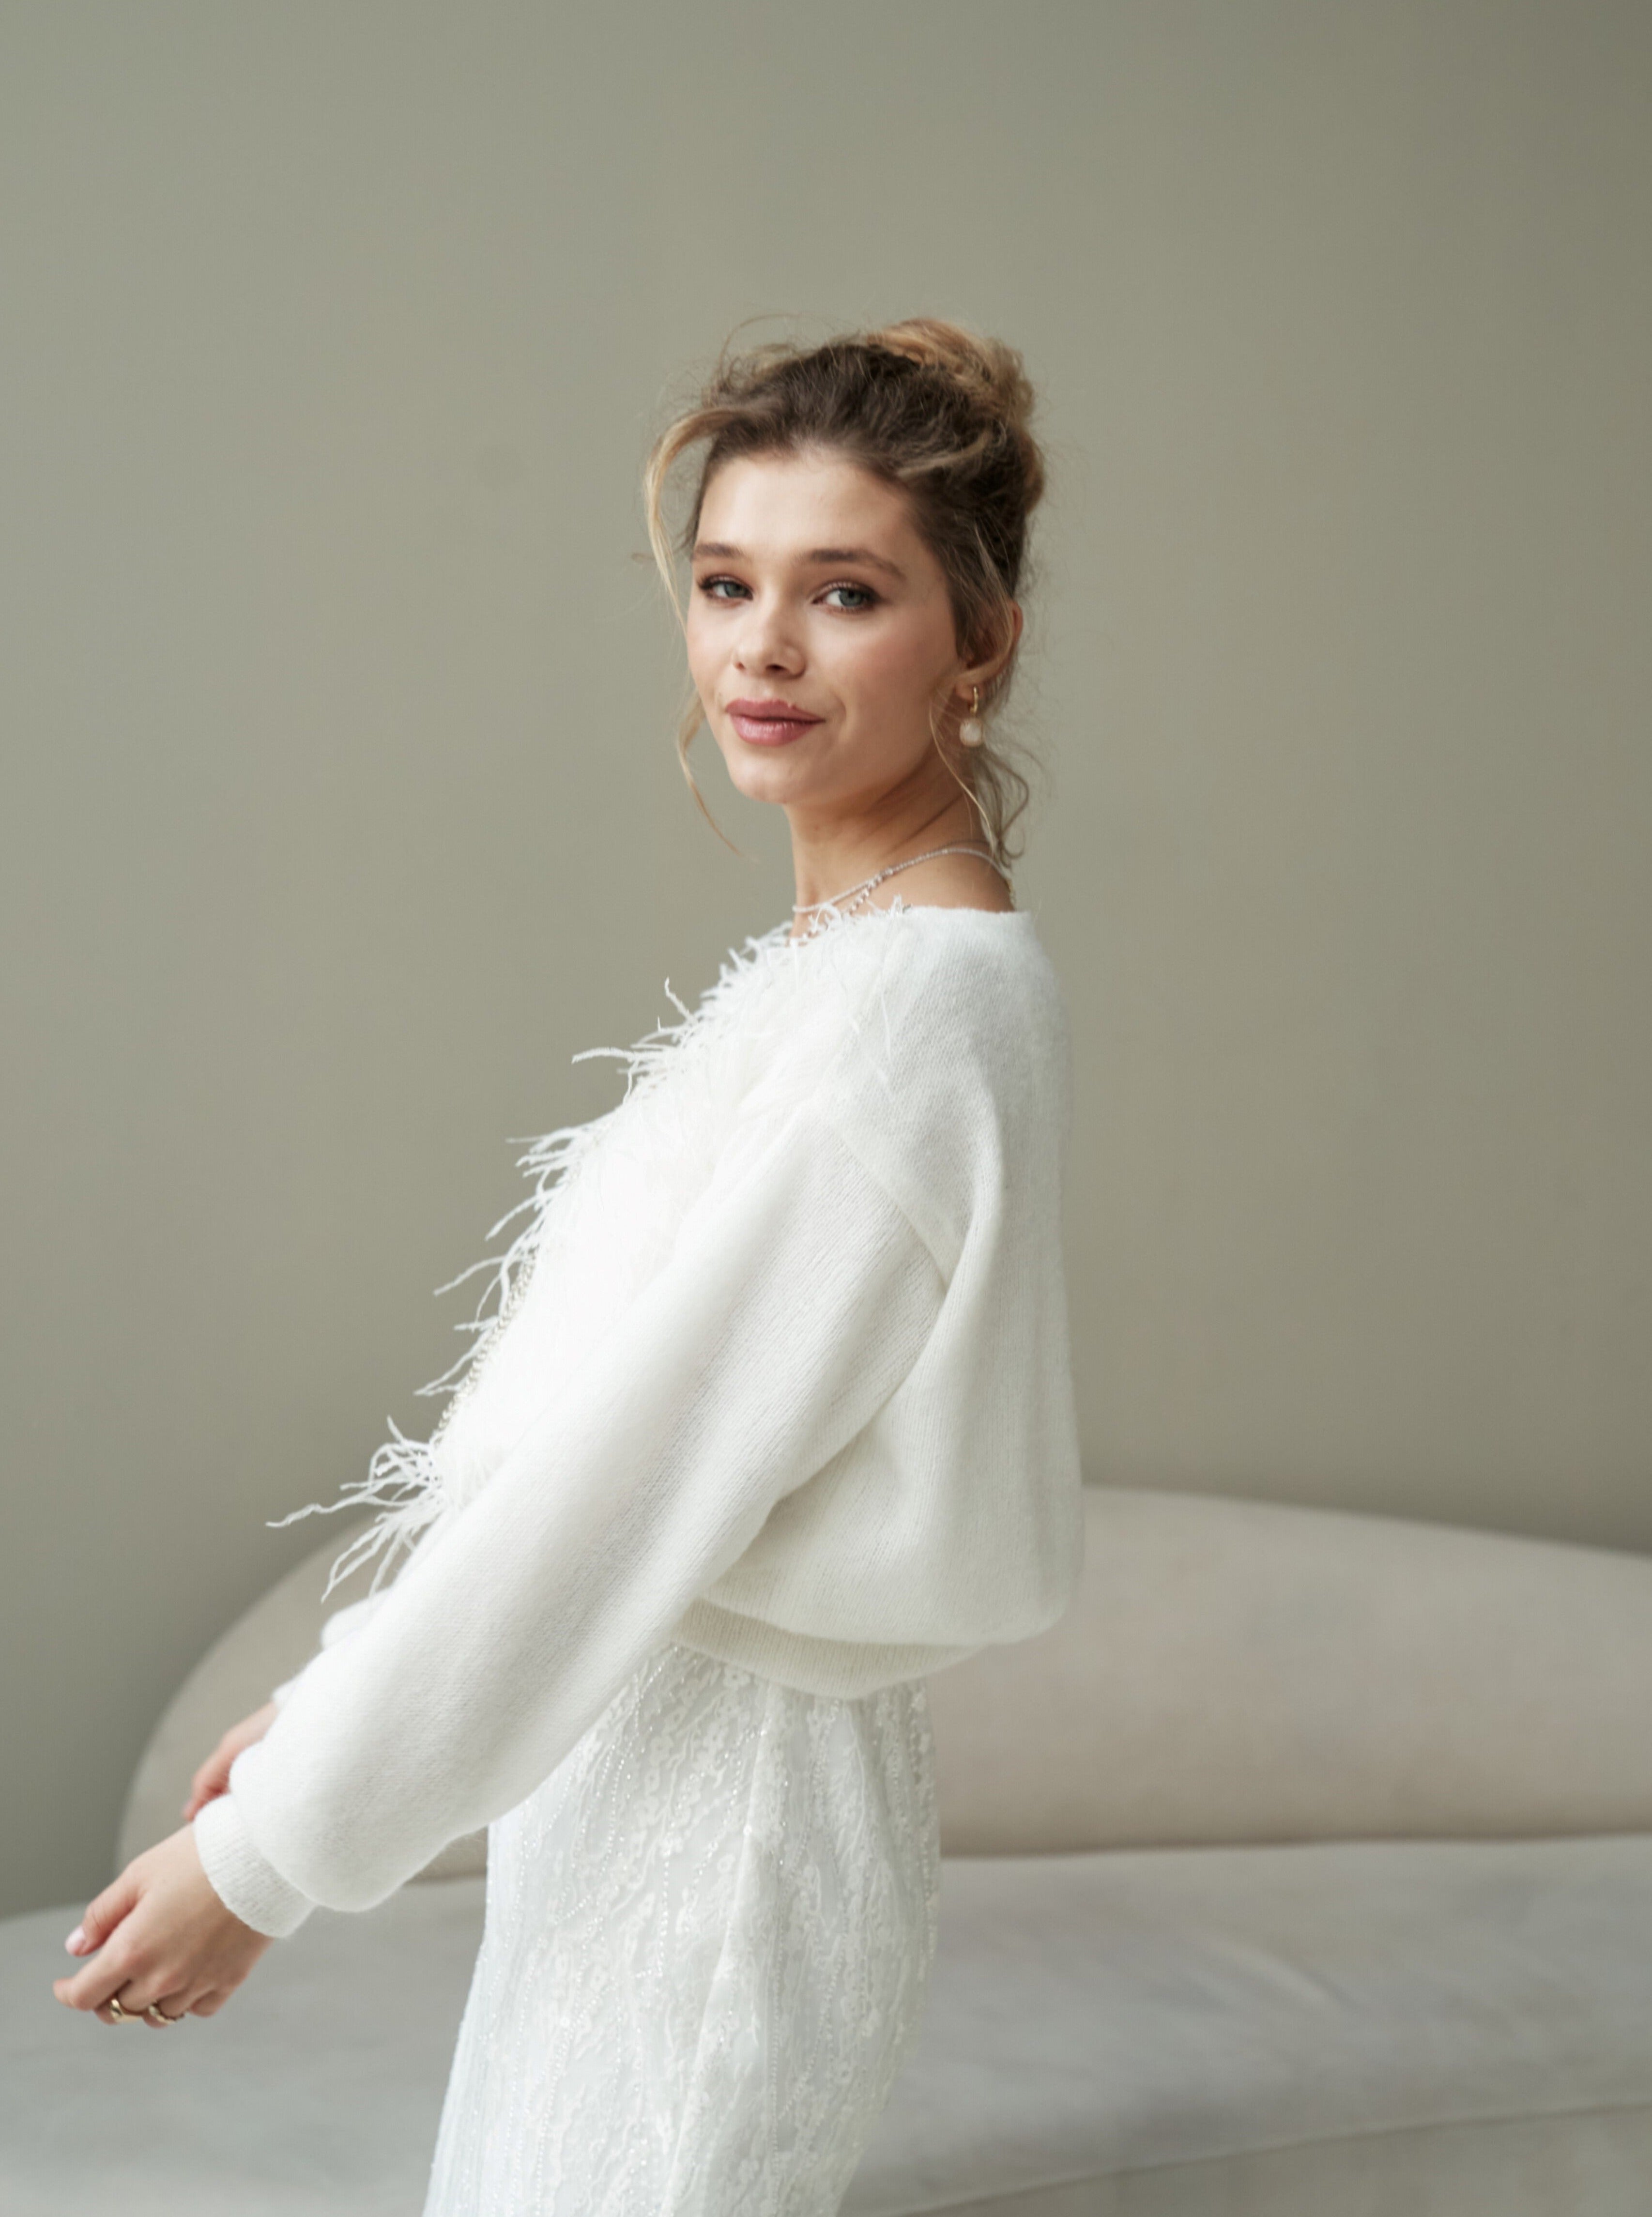 Bridal sweater with feather and handmade embroidery. Wedding cardigan with feathers.